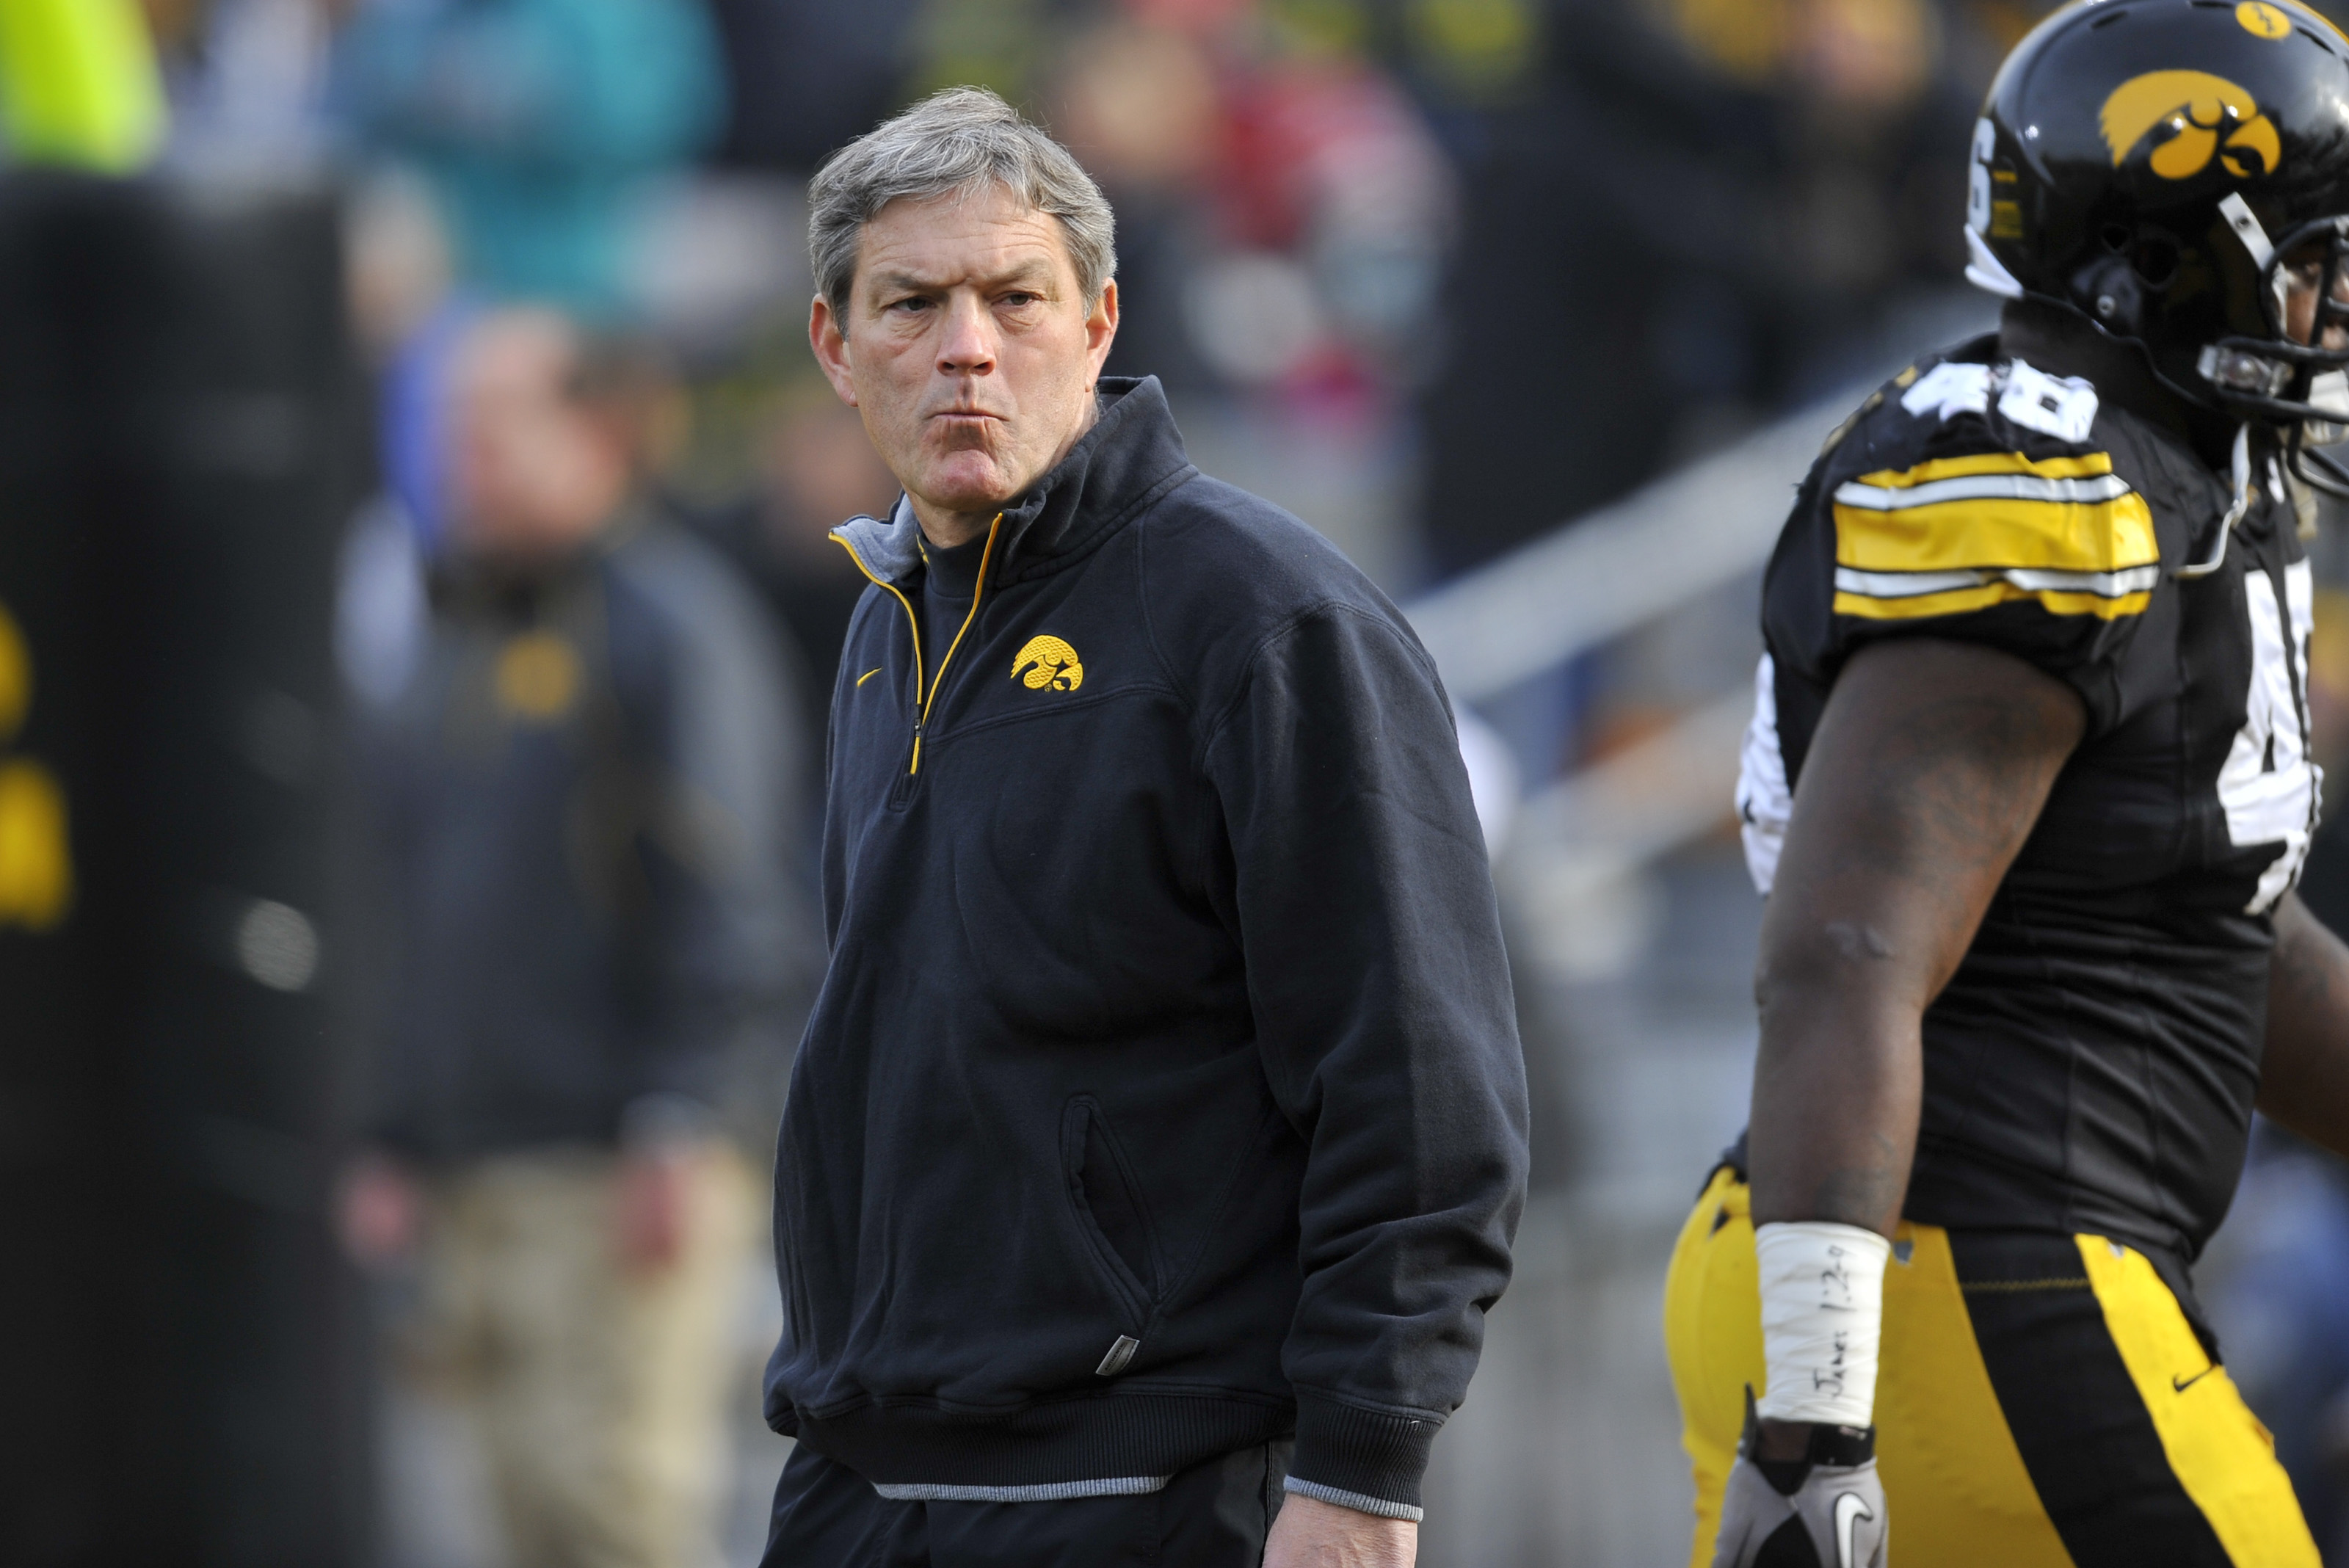 IOWA CITY, IA - NOVEMBER 20: University of Iowa Hawkeyes head coach Kirk Ferentz looks on from the sideline during pre game warm ups before game action against the Ohio State Buckeyes at Kinnick Stadium on November 20, 2010 in Iowa City, Iowa. Ohio State